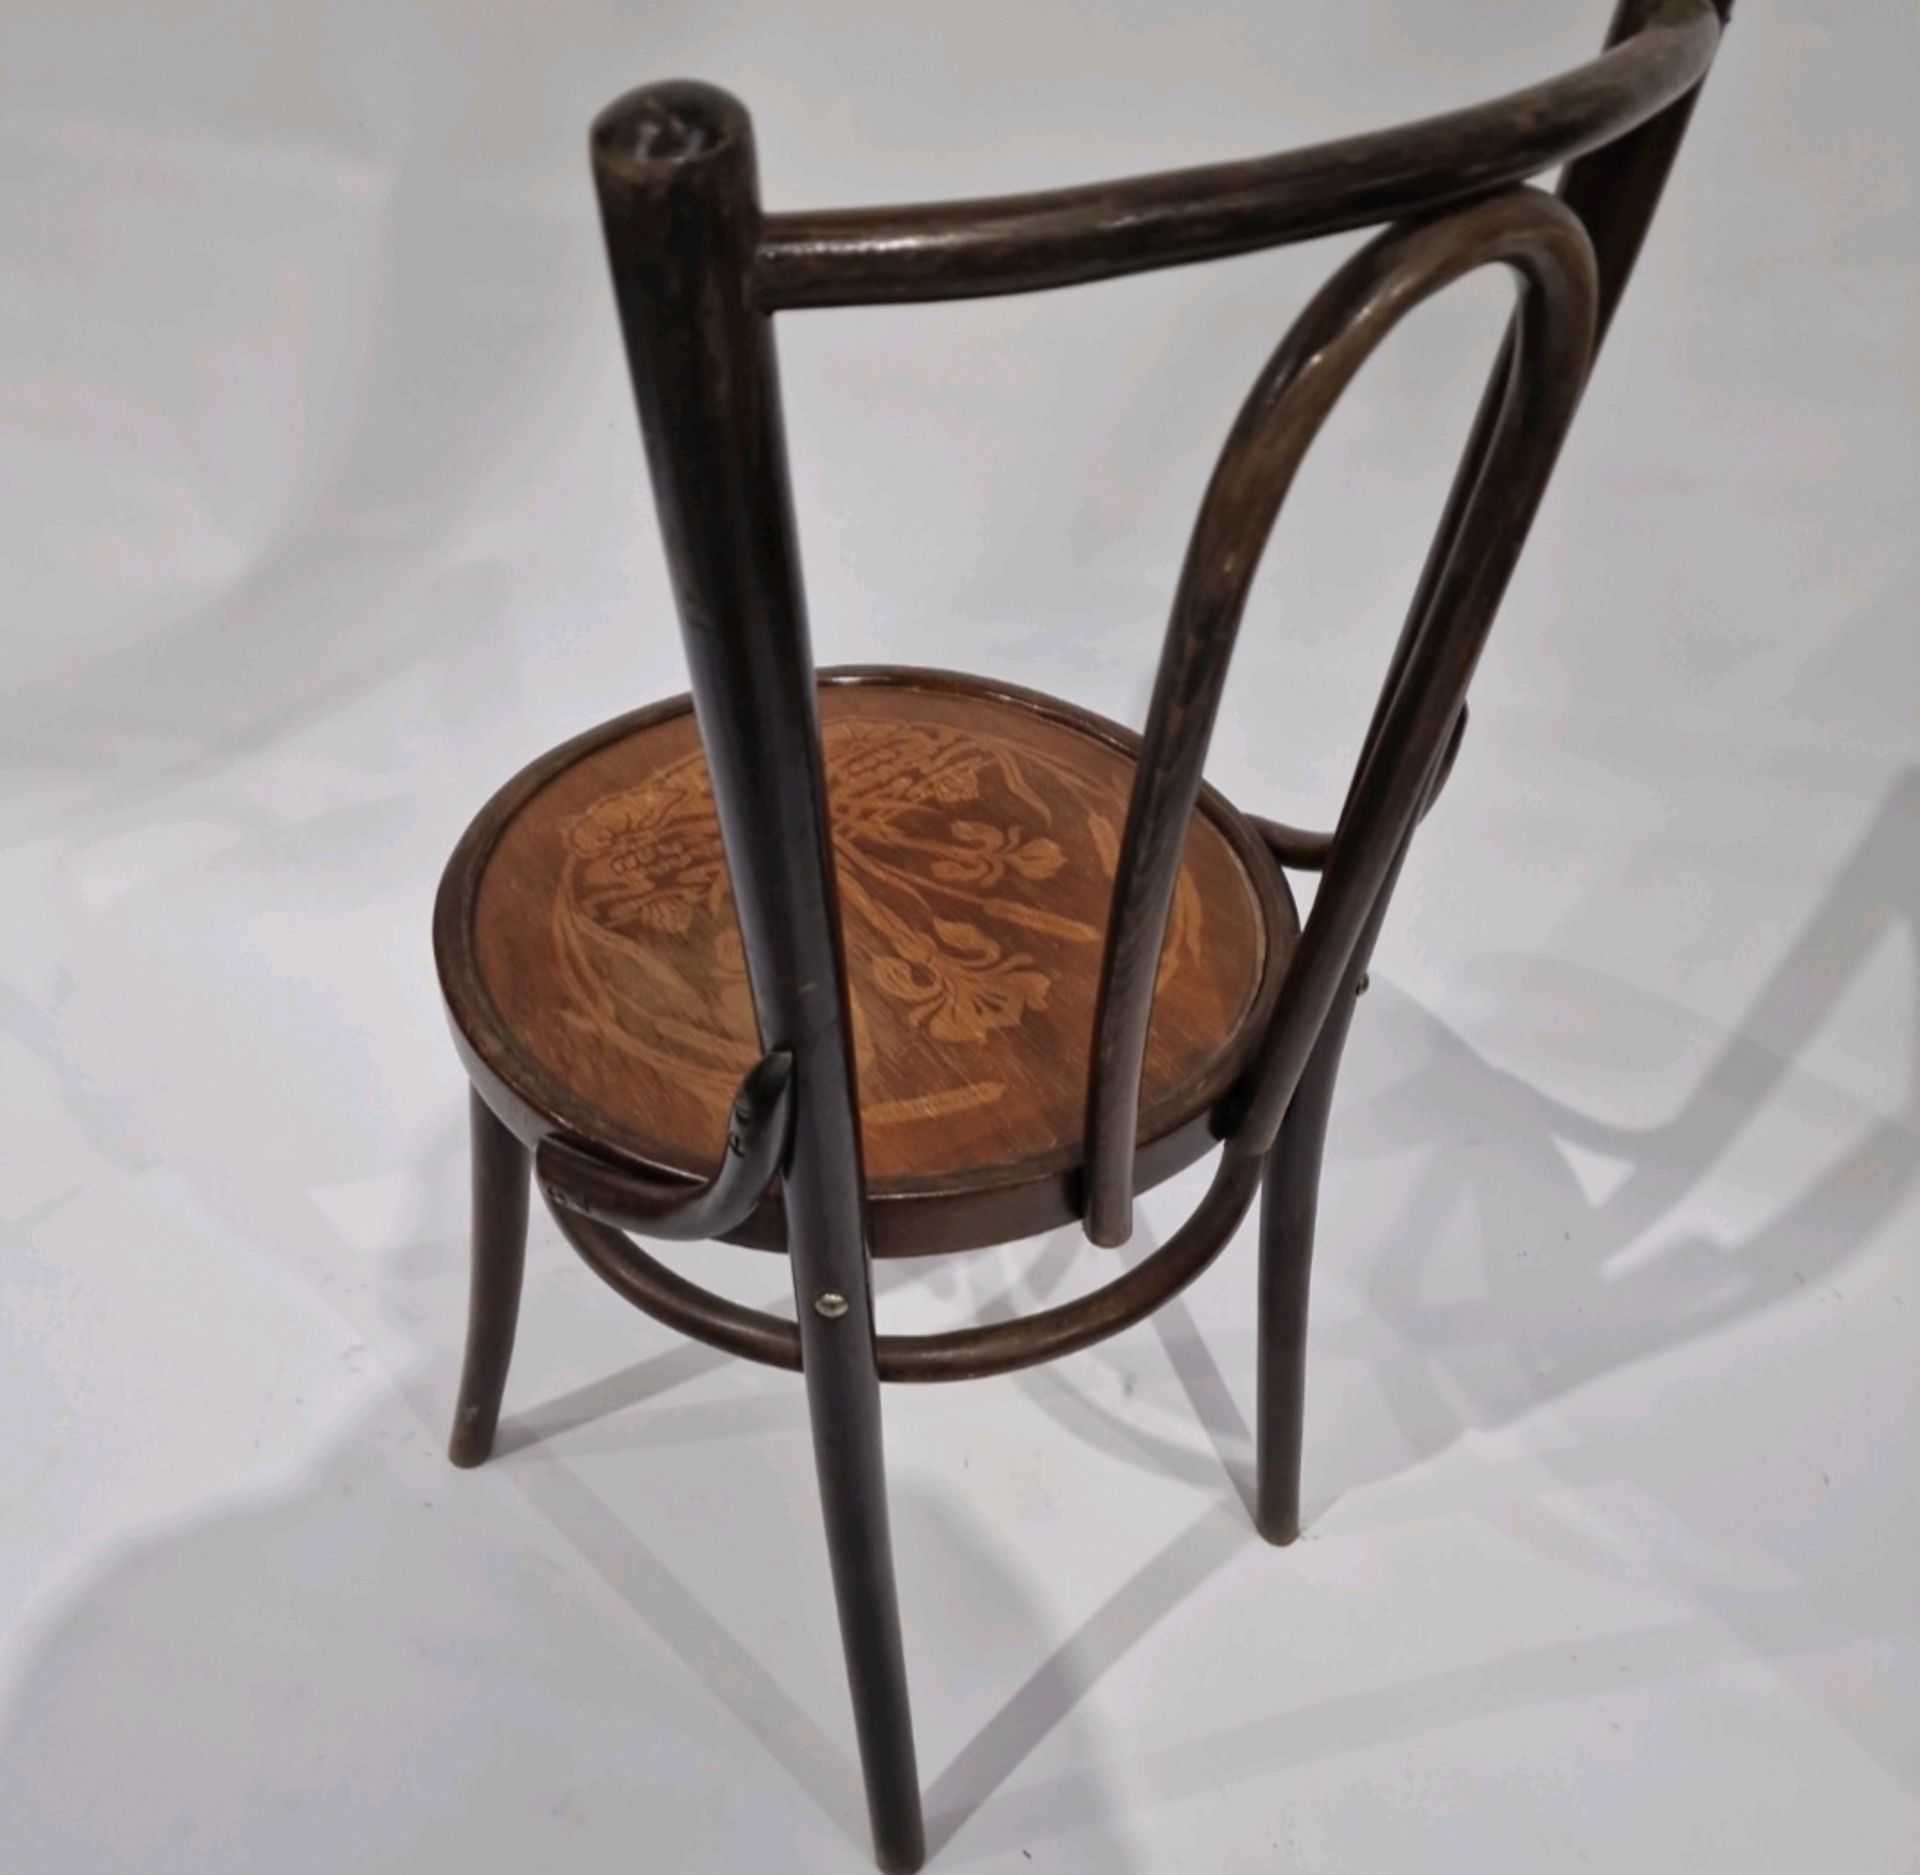 Decorative Bentwood Chair - Image 2 of 3